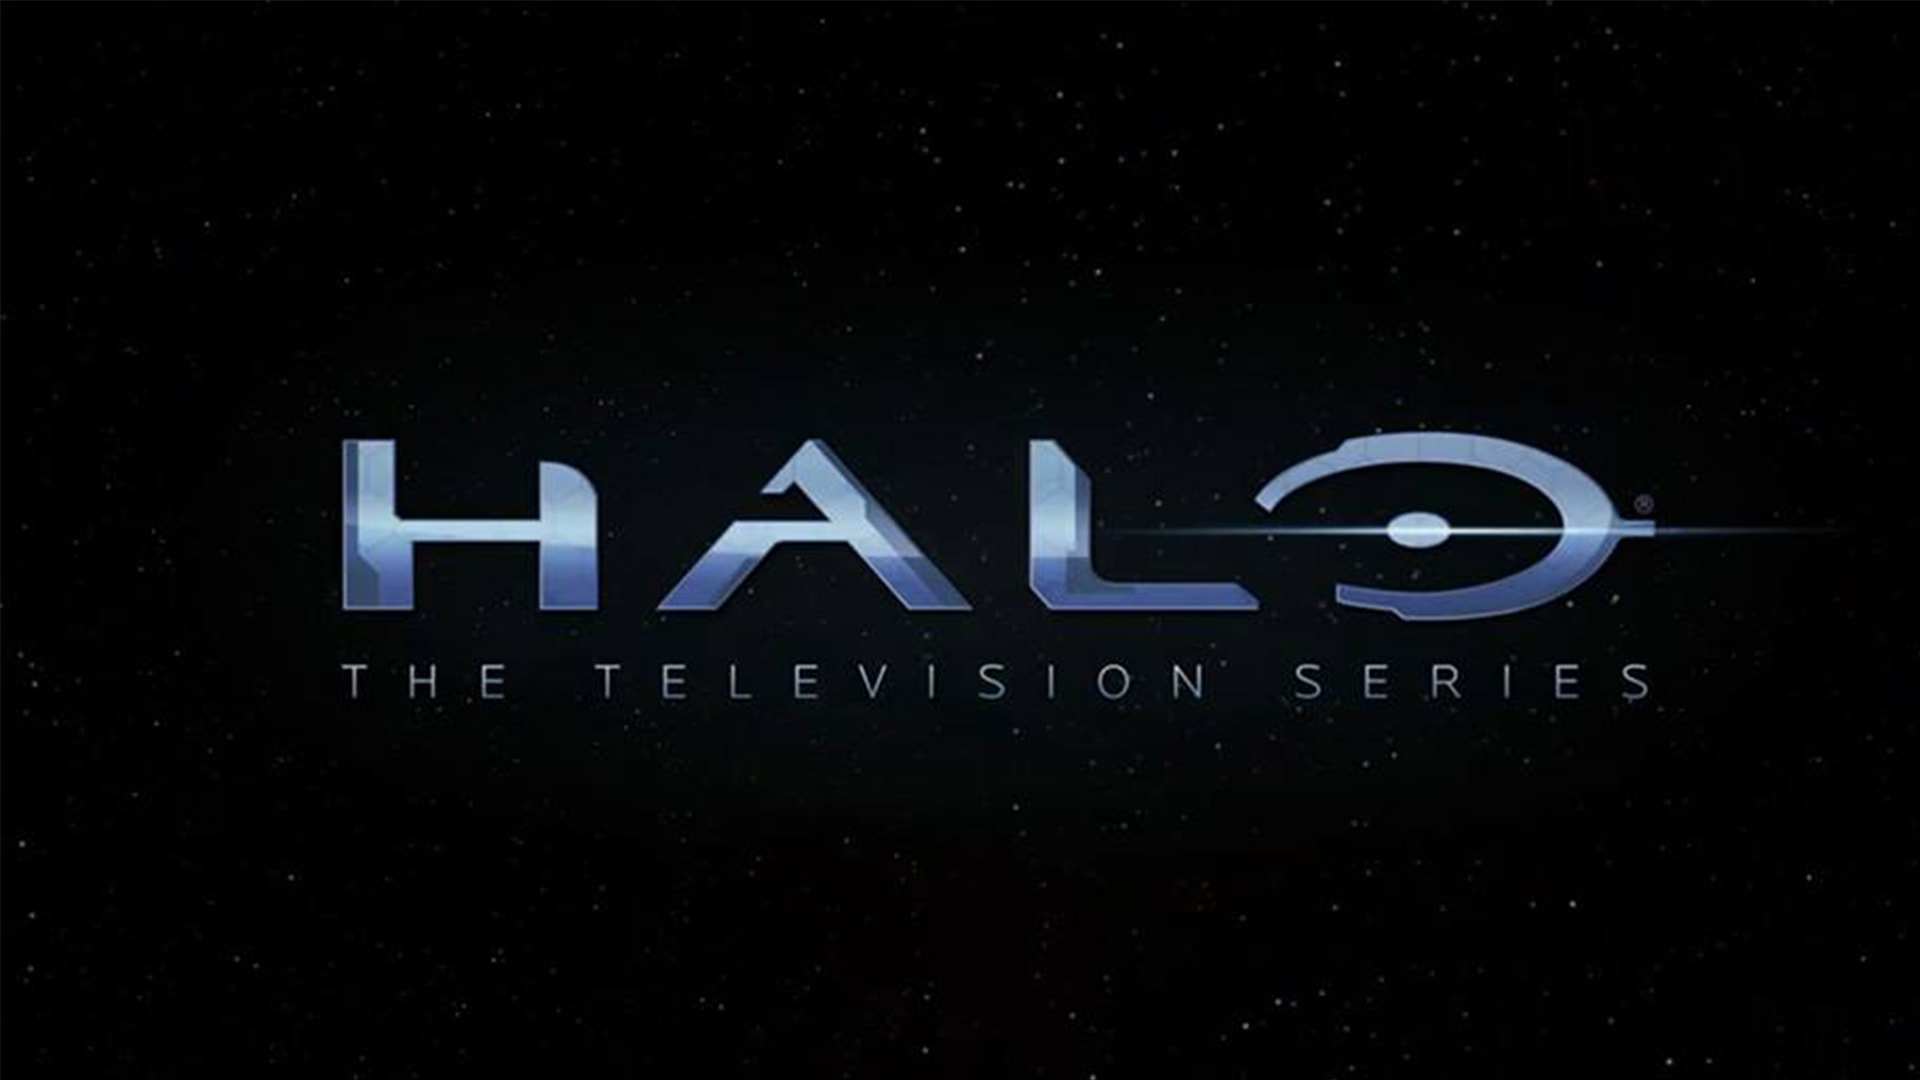 Halo TV Series From Xbox Announcement min